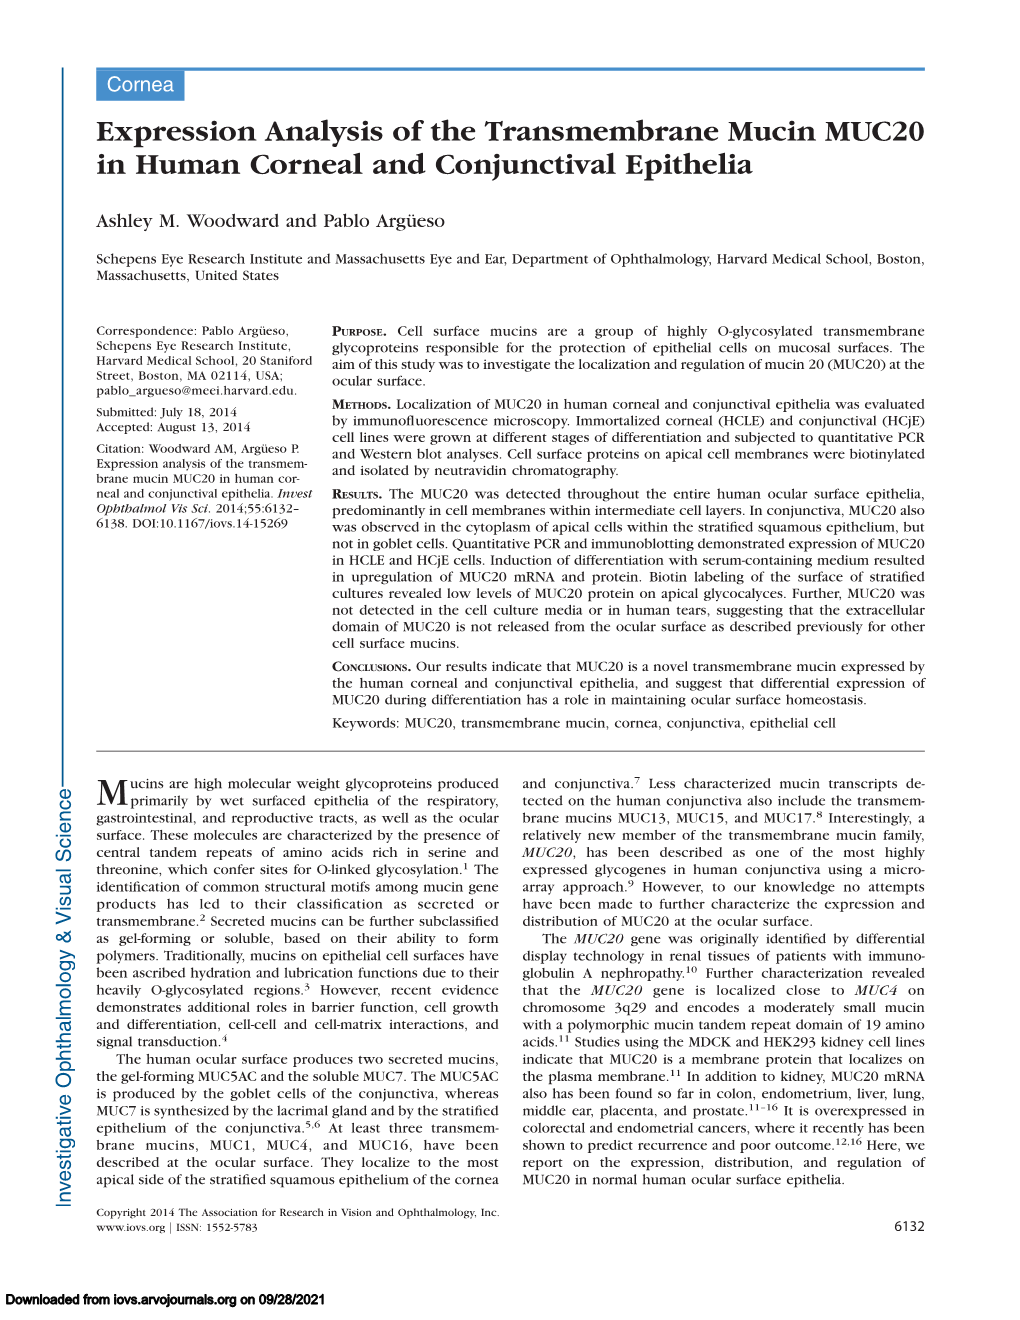 Expression Analysis of the Transmembrane Mucin MUC20 in Human Corneal and Conjunctival Epithelia